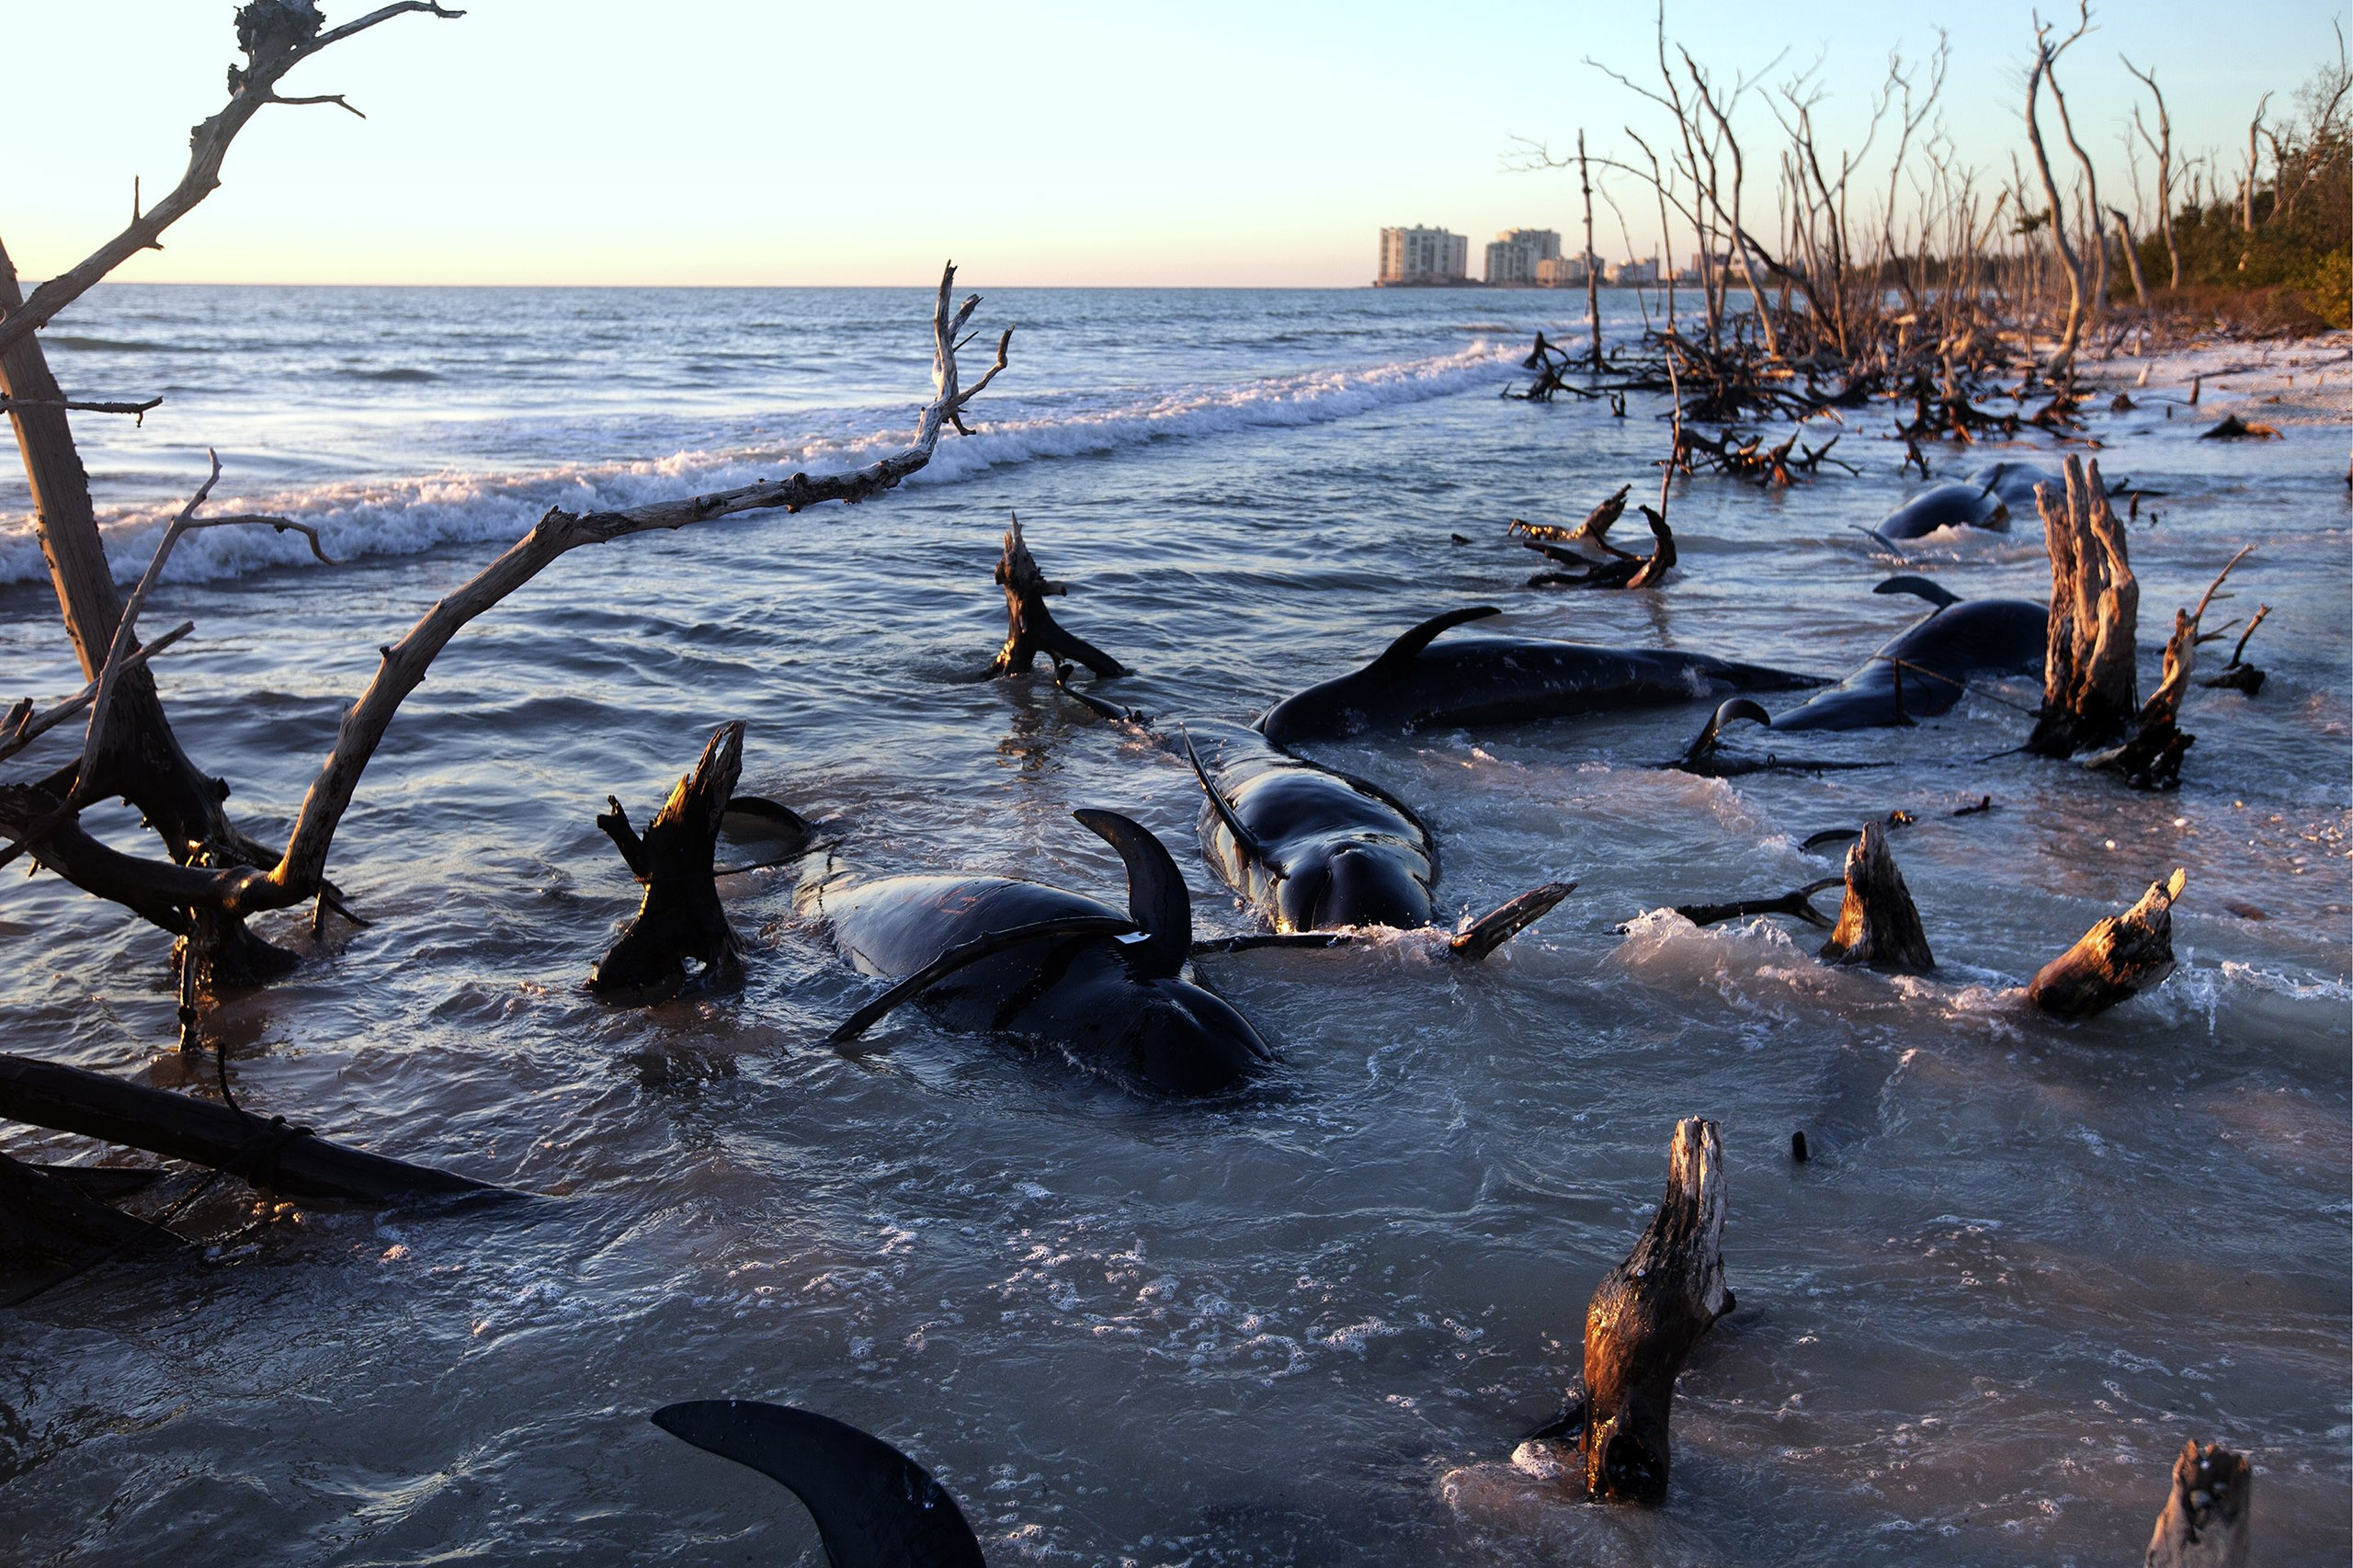 Twenty-five pilot whales beached themselves on Kice Island off southwest Florida in 2014. Sickness related to environmental problems can trigger beachings, which are on the rise (Carolina Hidalgo—Naples Daily News/AP)